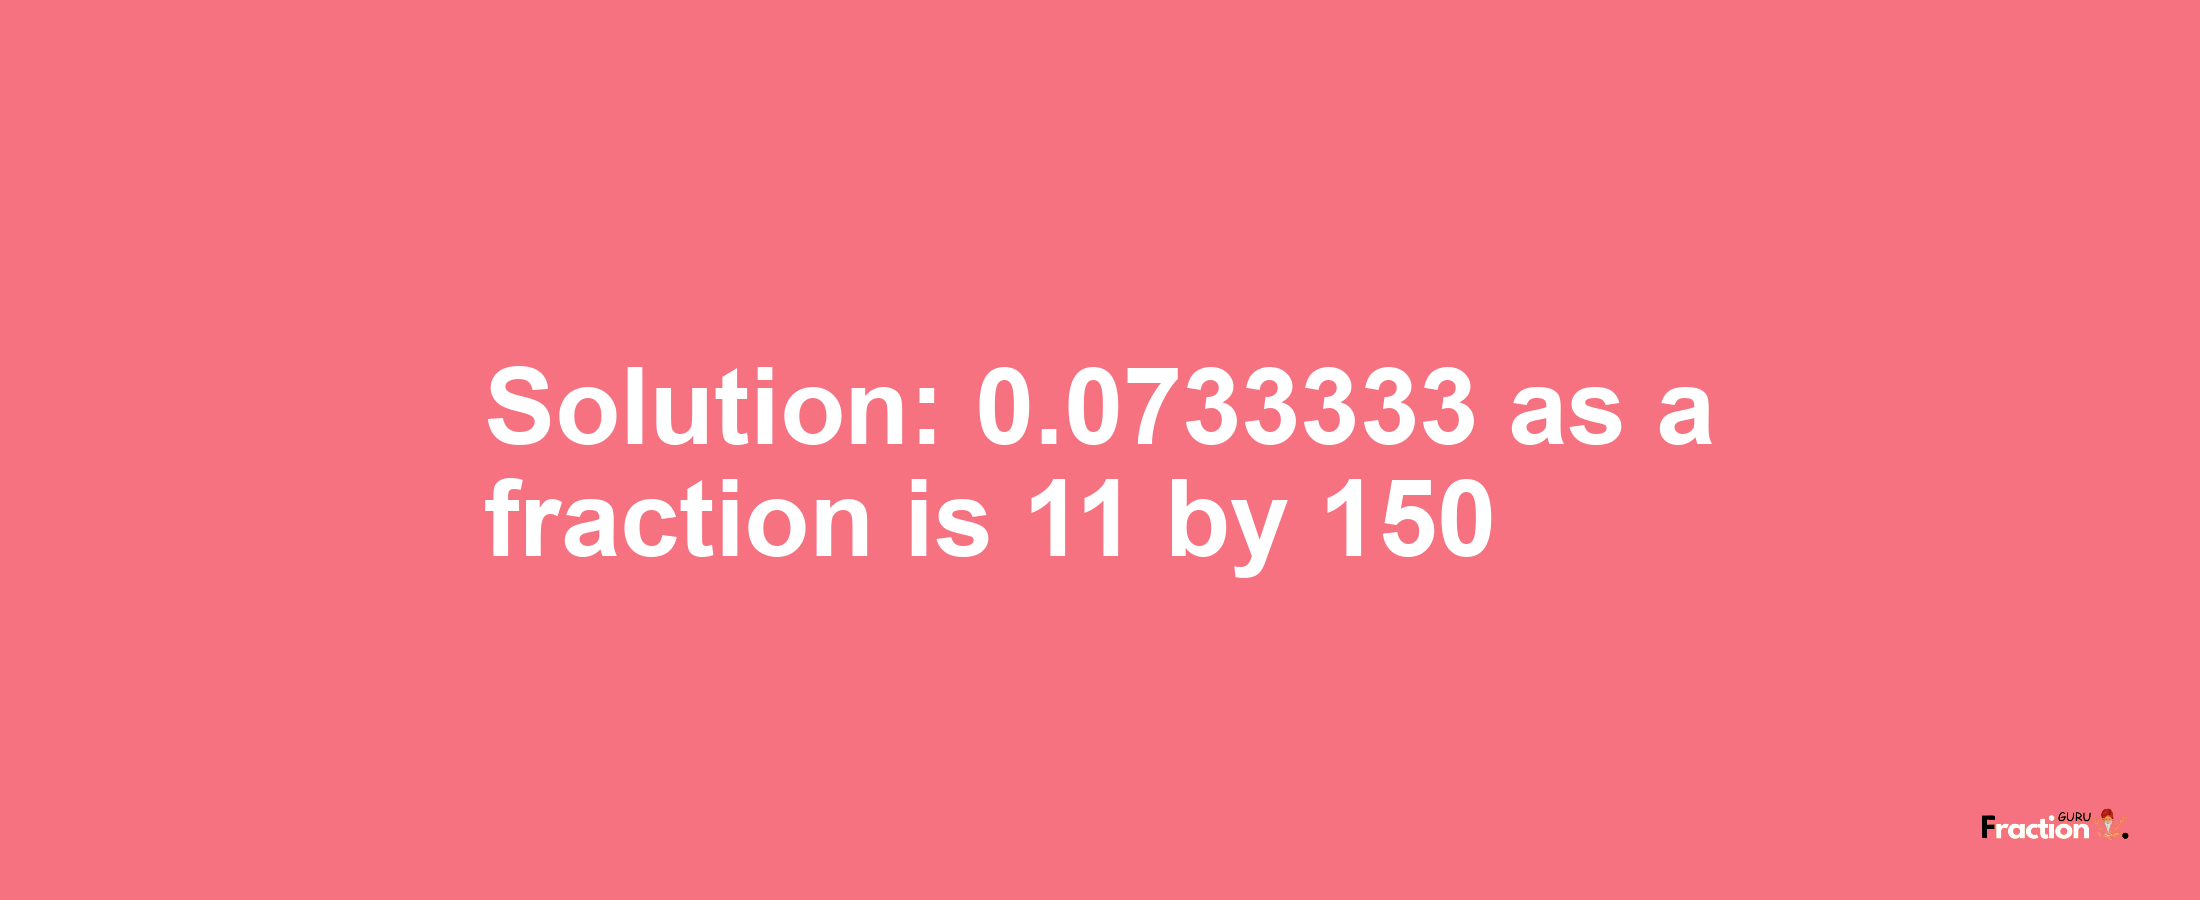 Solution:0.0733333 as a fraction is 11/150